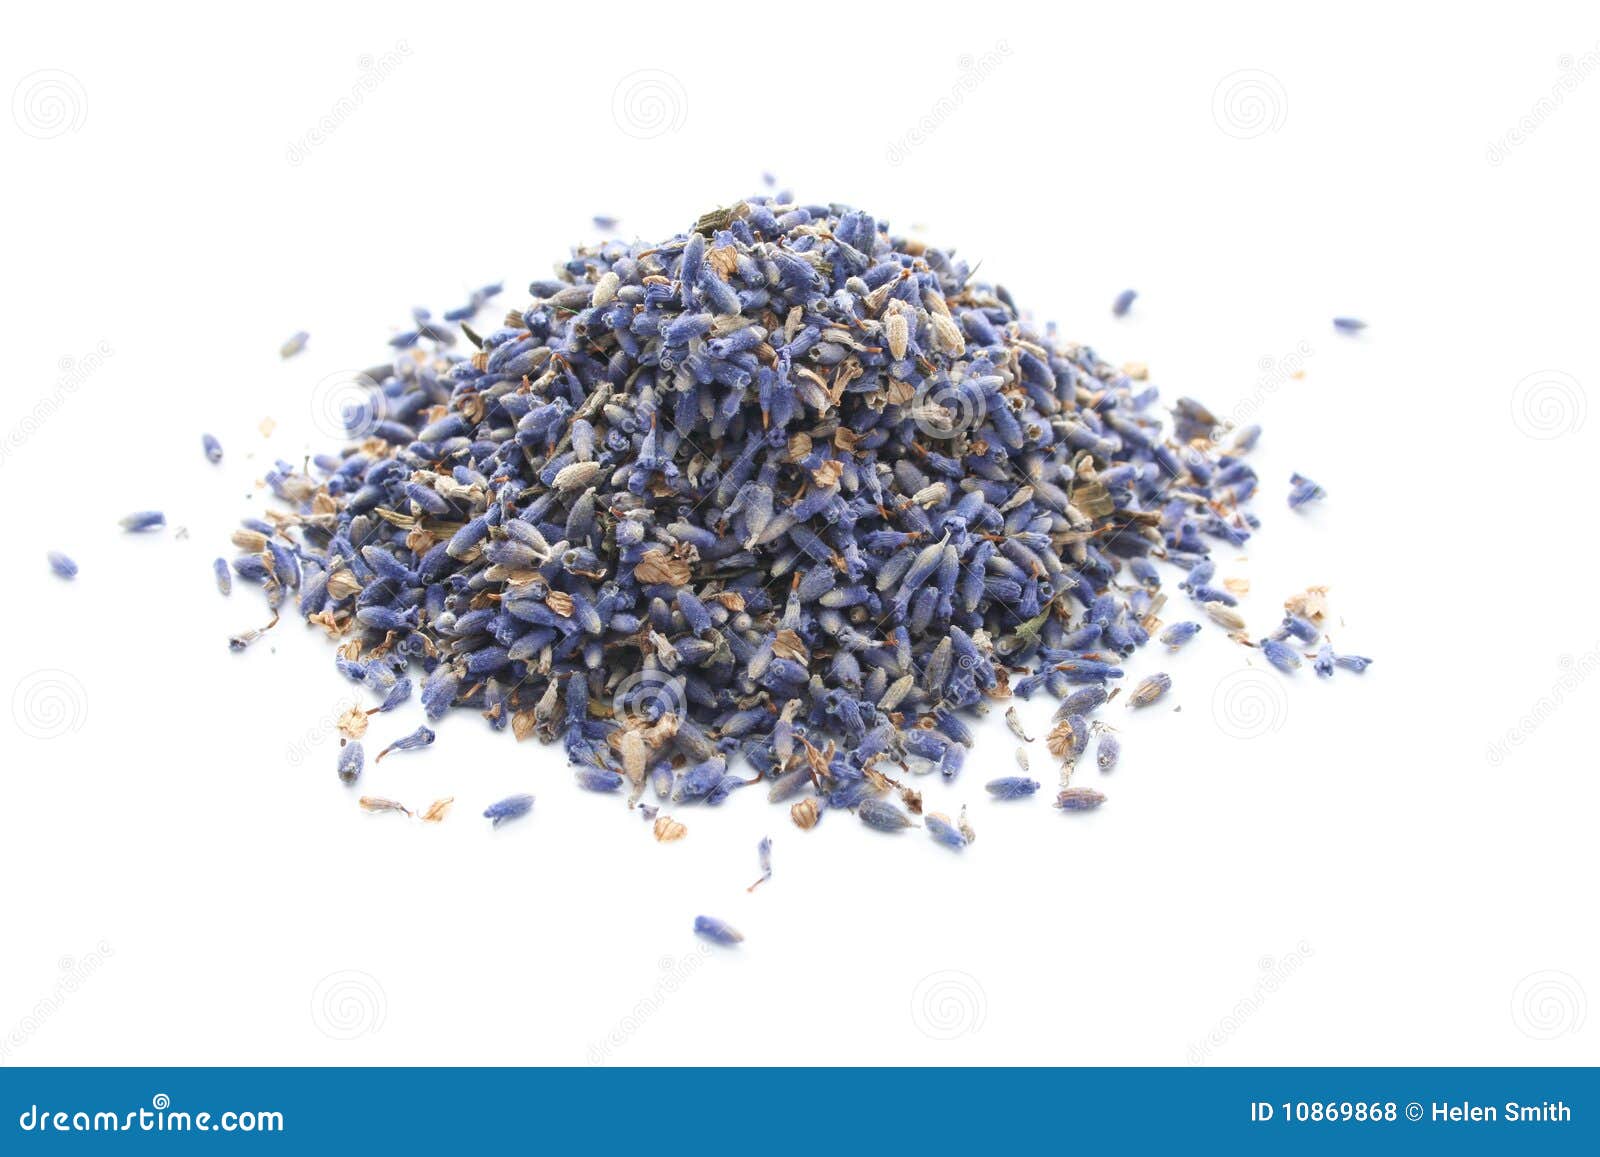 dried lavender close up